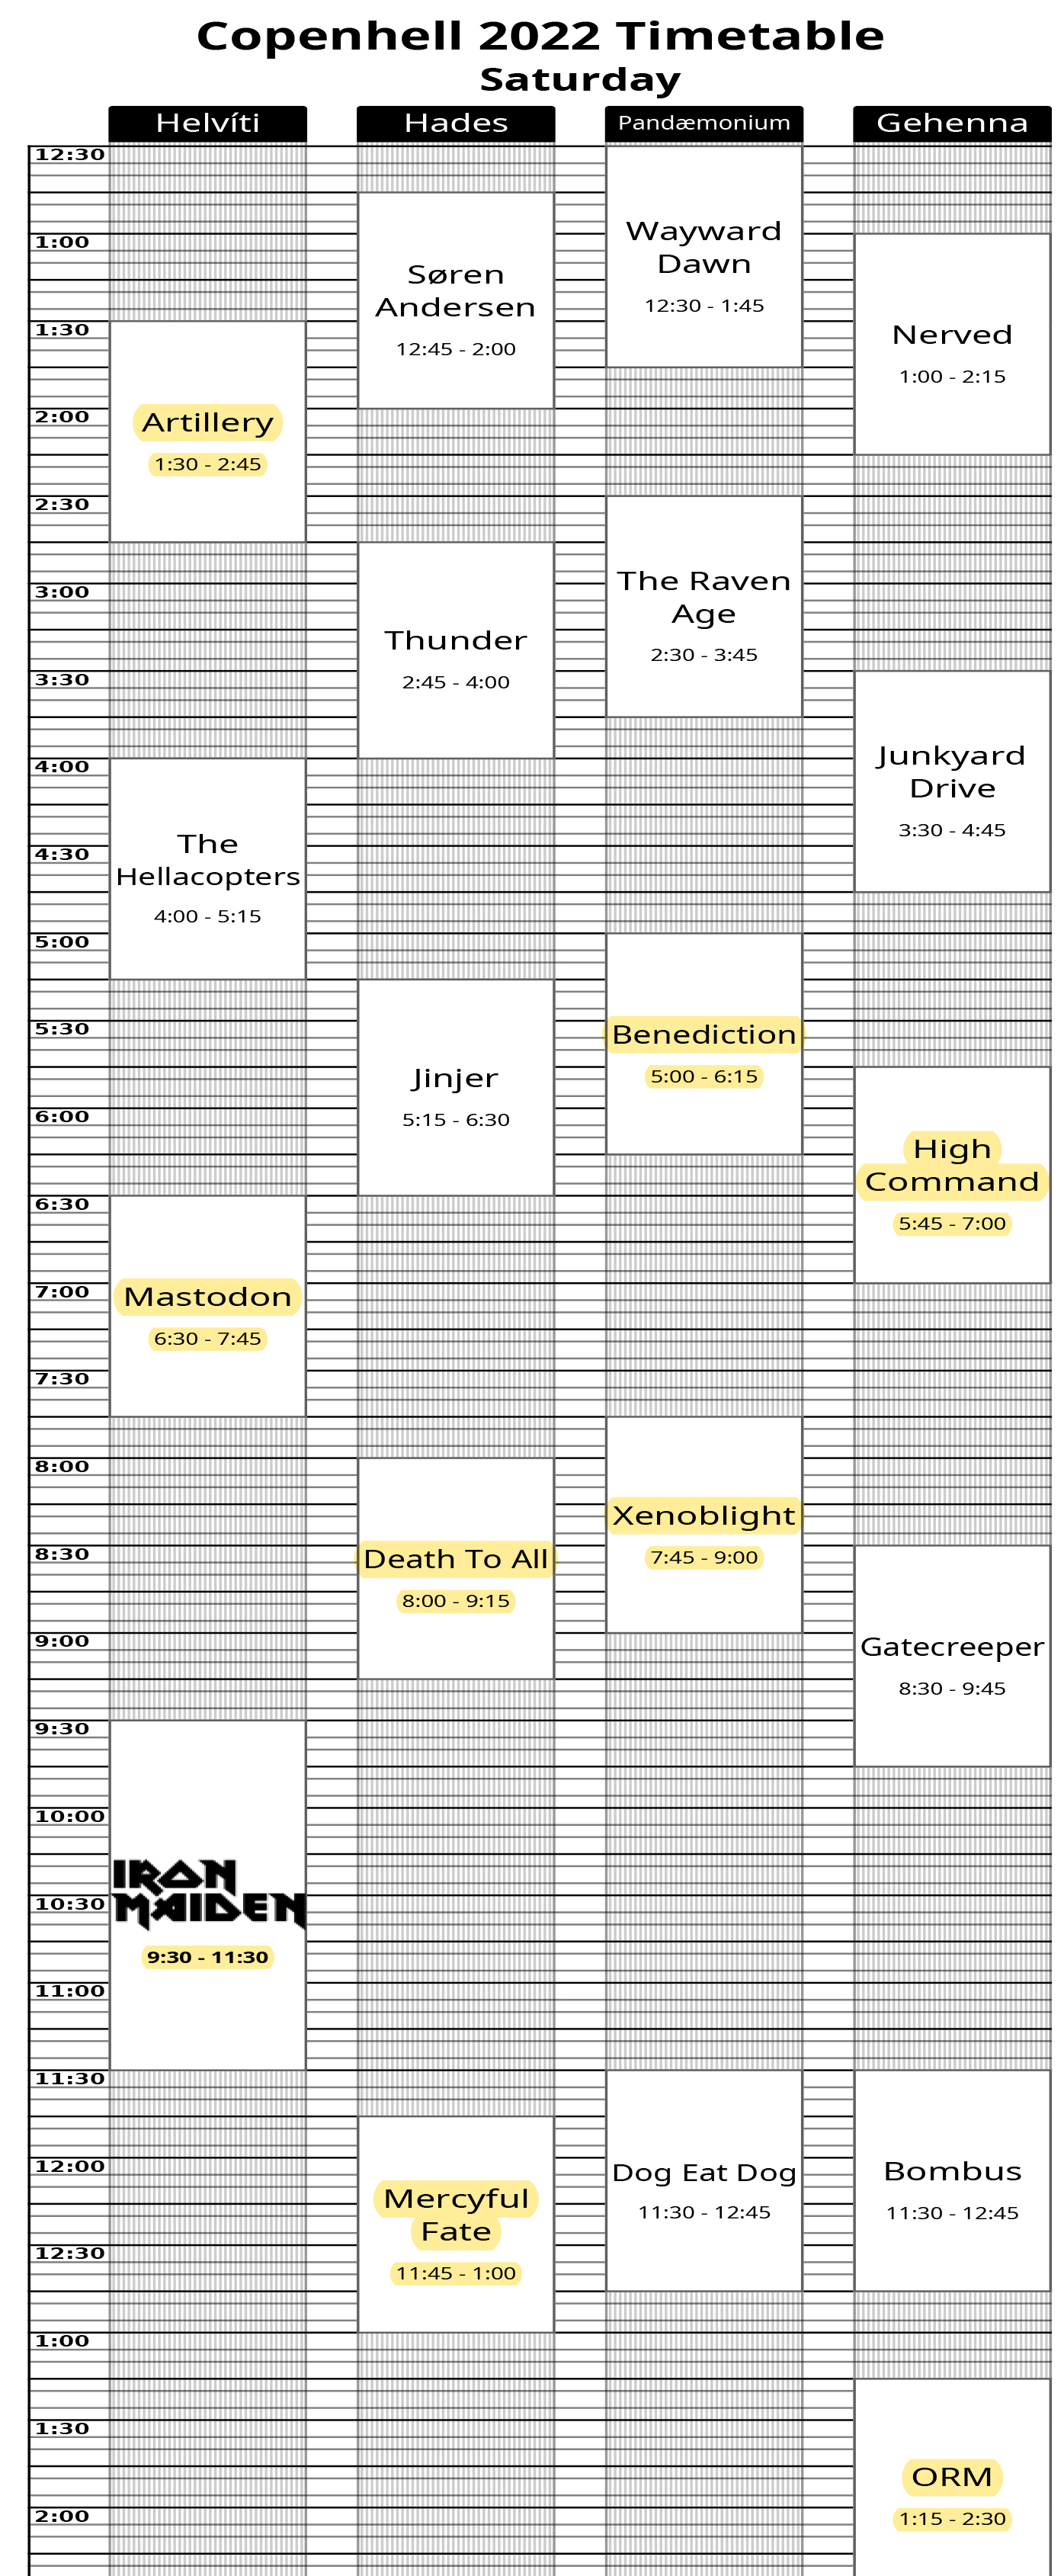 timetable schedule running order copenhell 2022